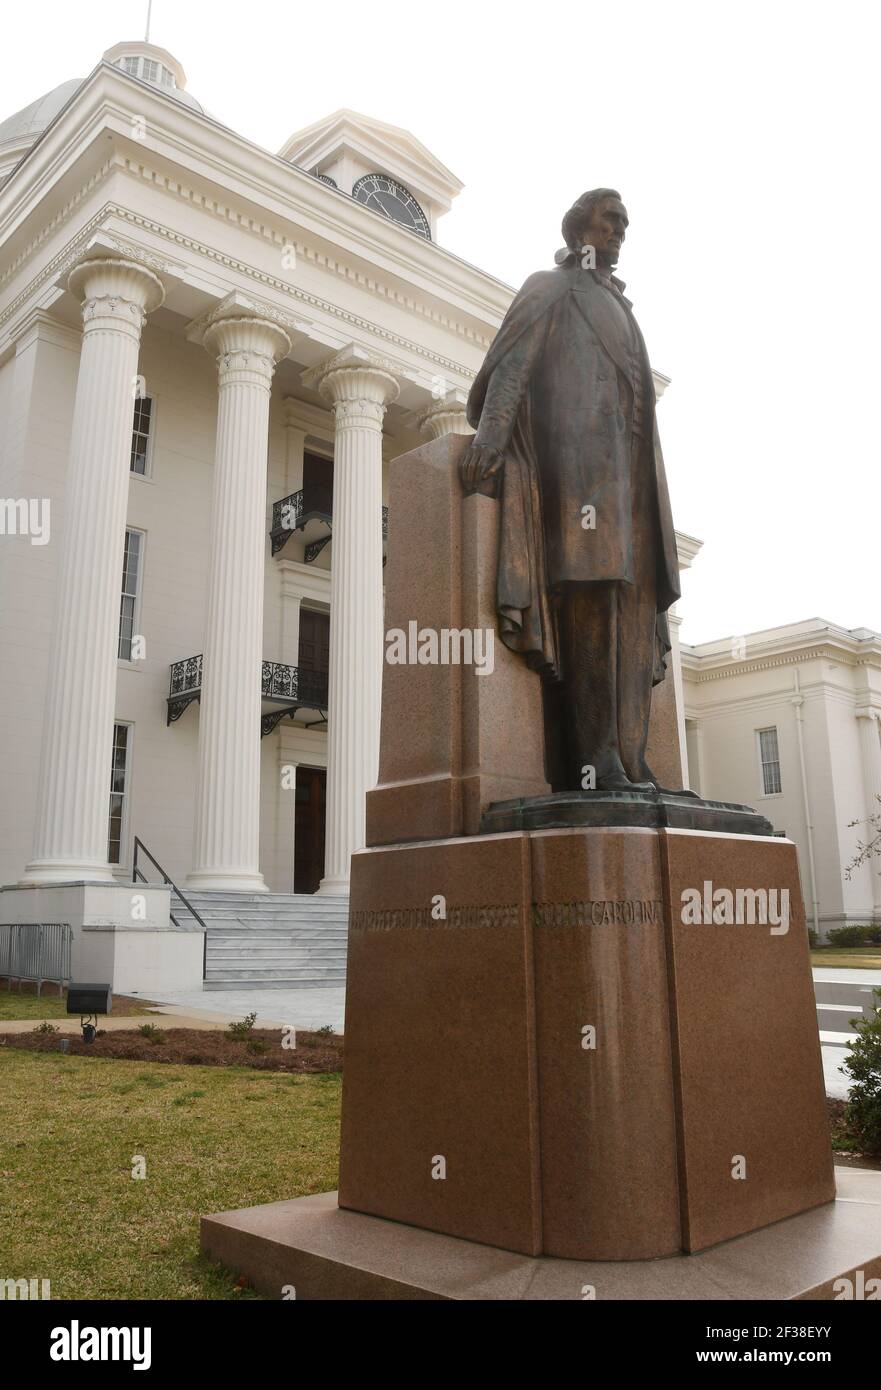 Montgomery, Alabama, USA. 15th Mar, 2021. A statue of JEFFERSON DAVIS, the president of the Confederate States of America, is seen at the Alabama State Capitol in Montgomery, Monday March 15 2021. The 1940 donation plaque from the United Daughters of the Confederacy declares him Ã¢â‚¬Å“Soldier Scholar Statesman. (Credit Image: © Mark HertzbergZUMA Wire) Stock Photo